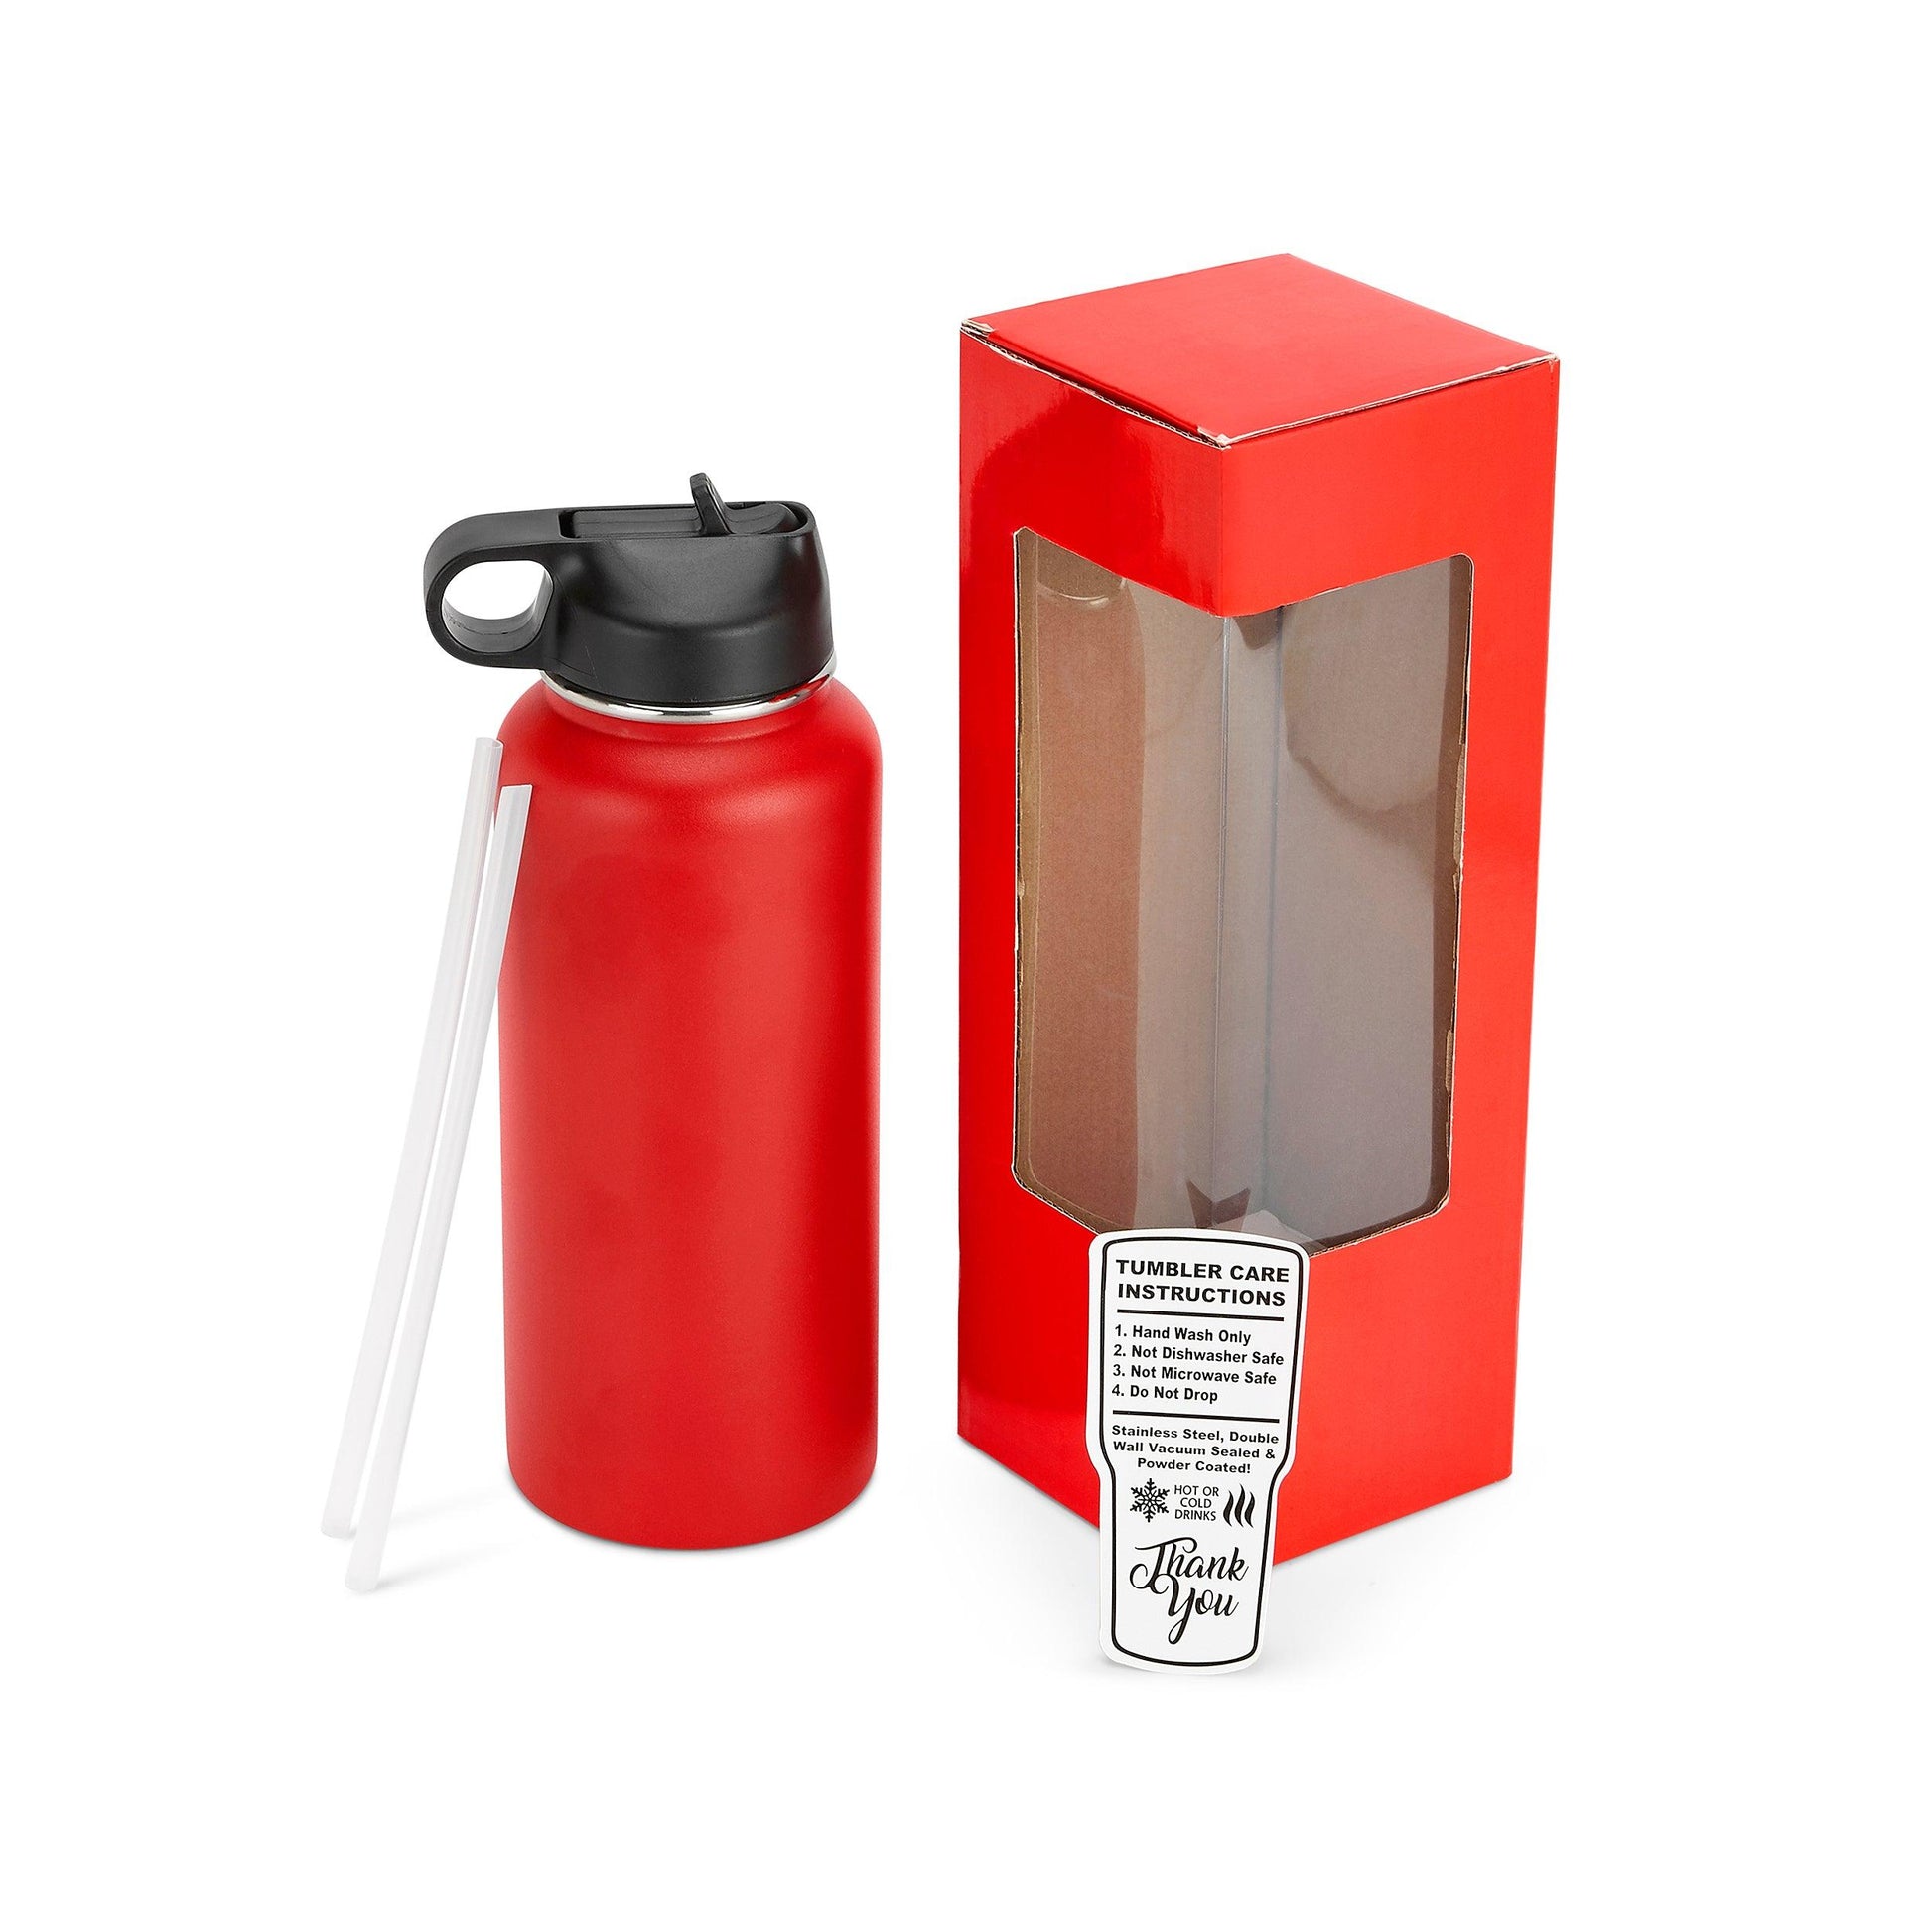 32 oz Stainless Steel Powder Coated Blank Insulated Sport Water